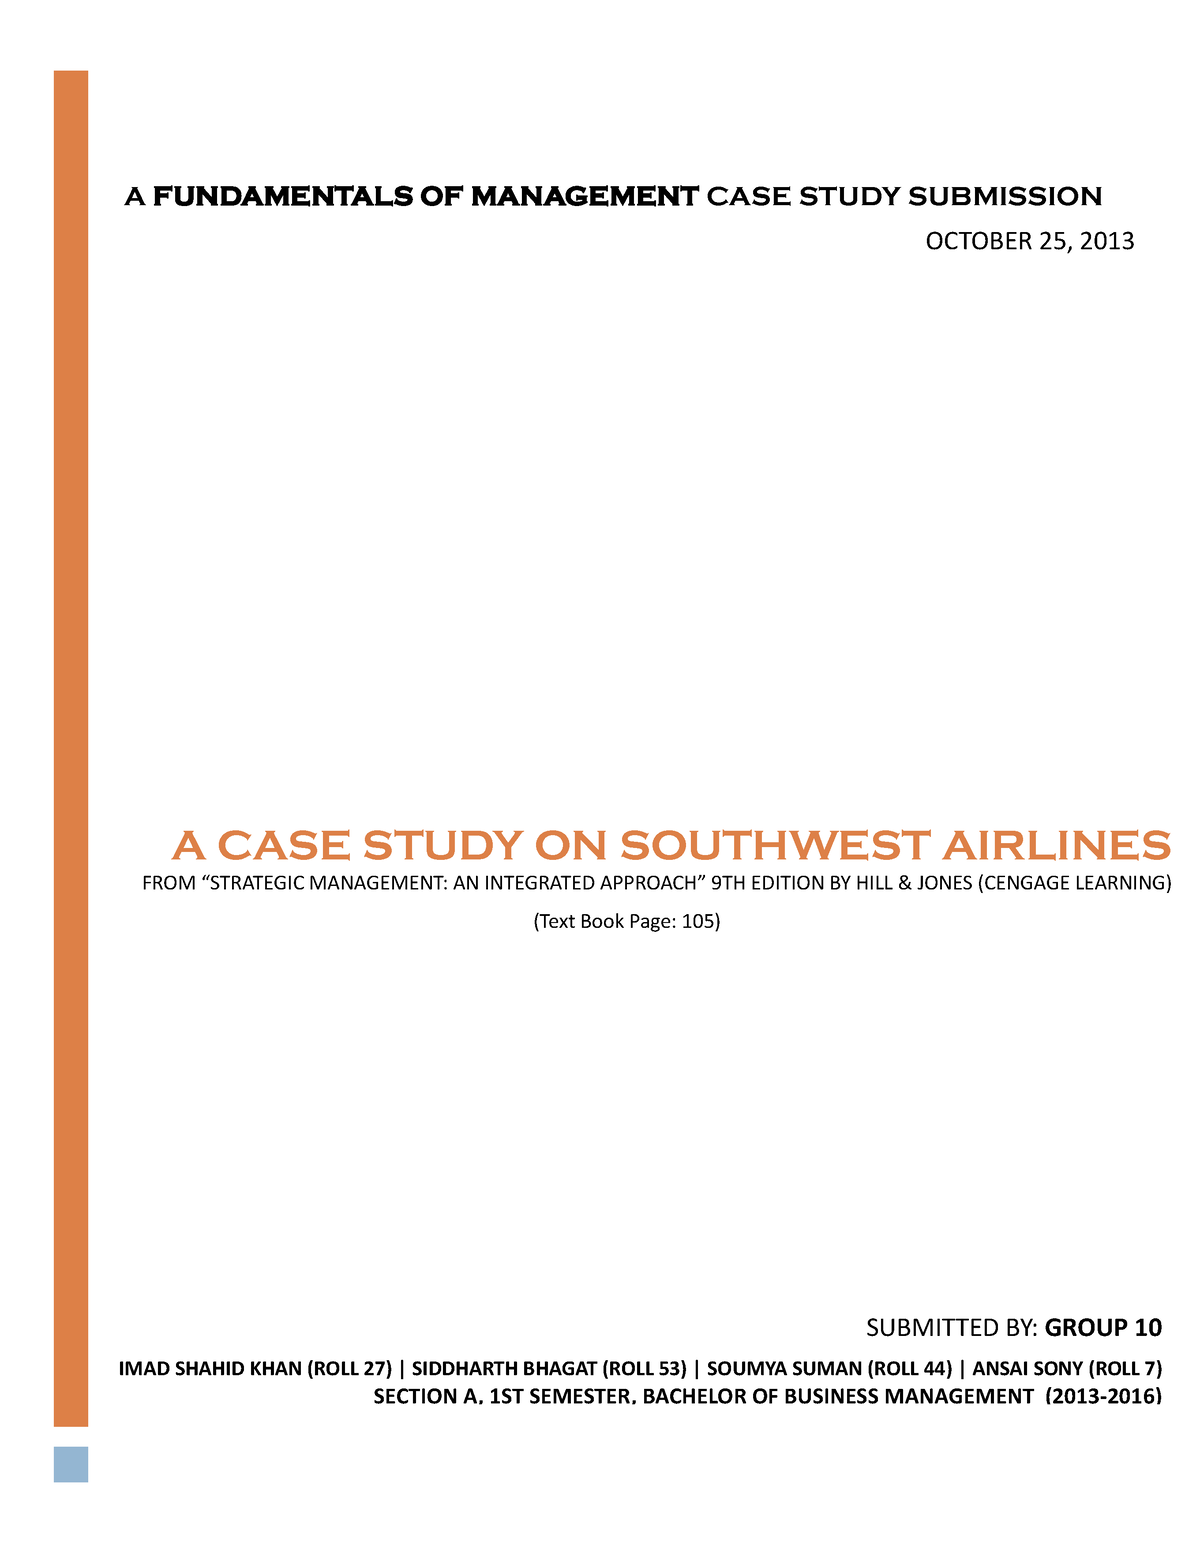 southwest airlines case study stanford graduate school business